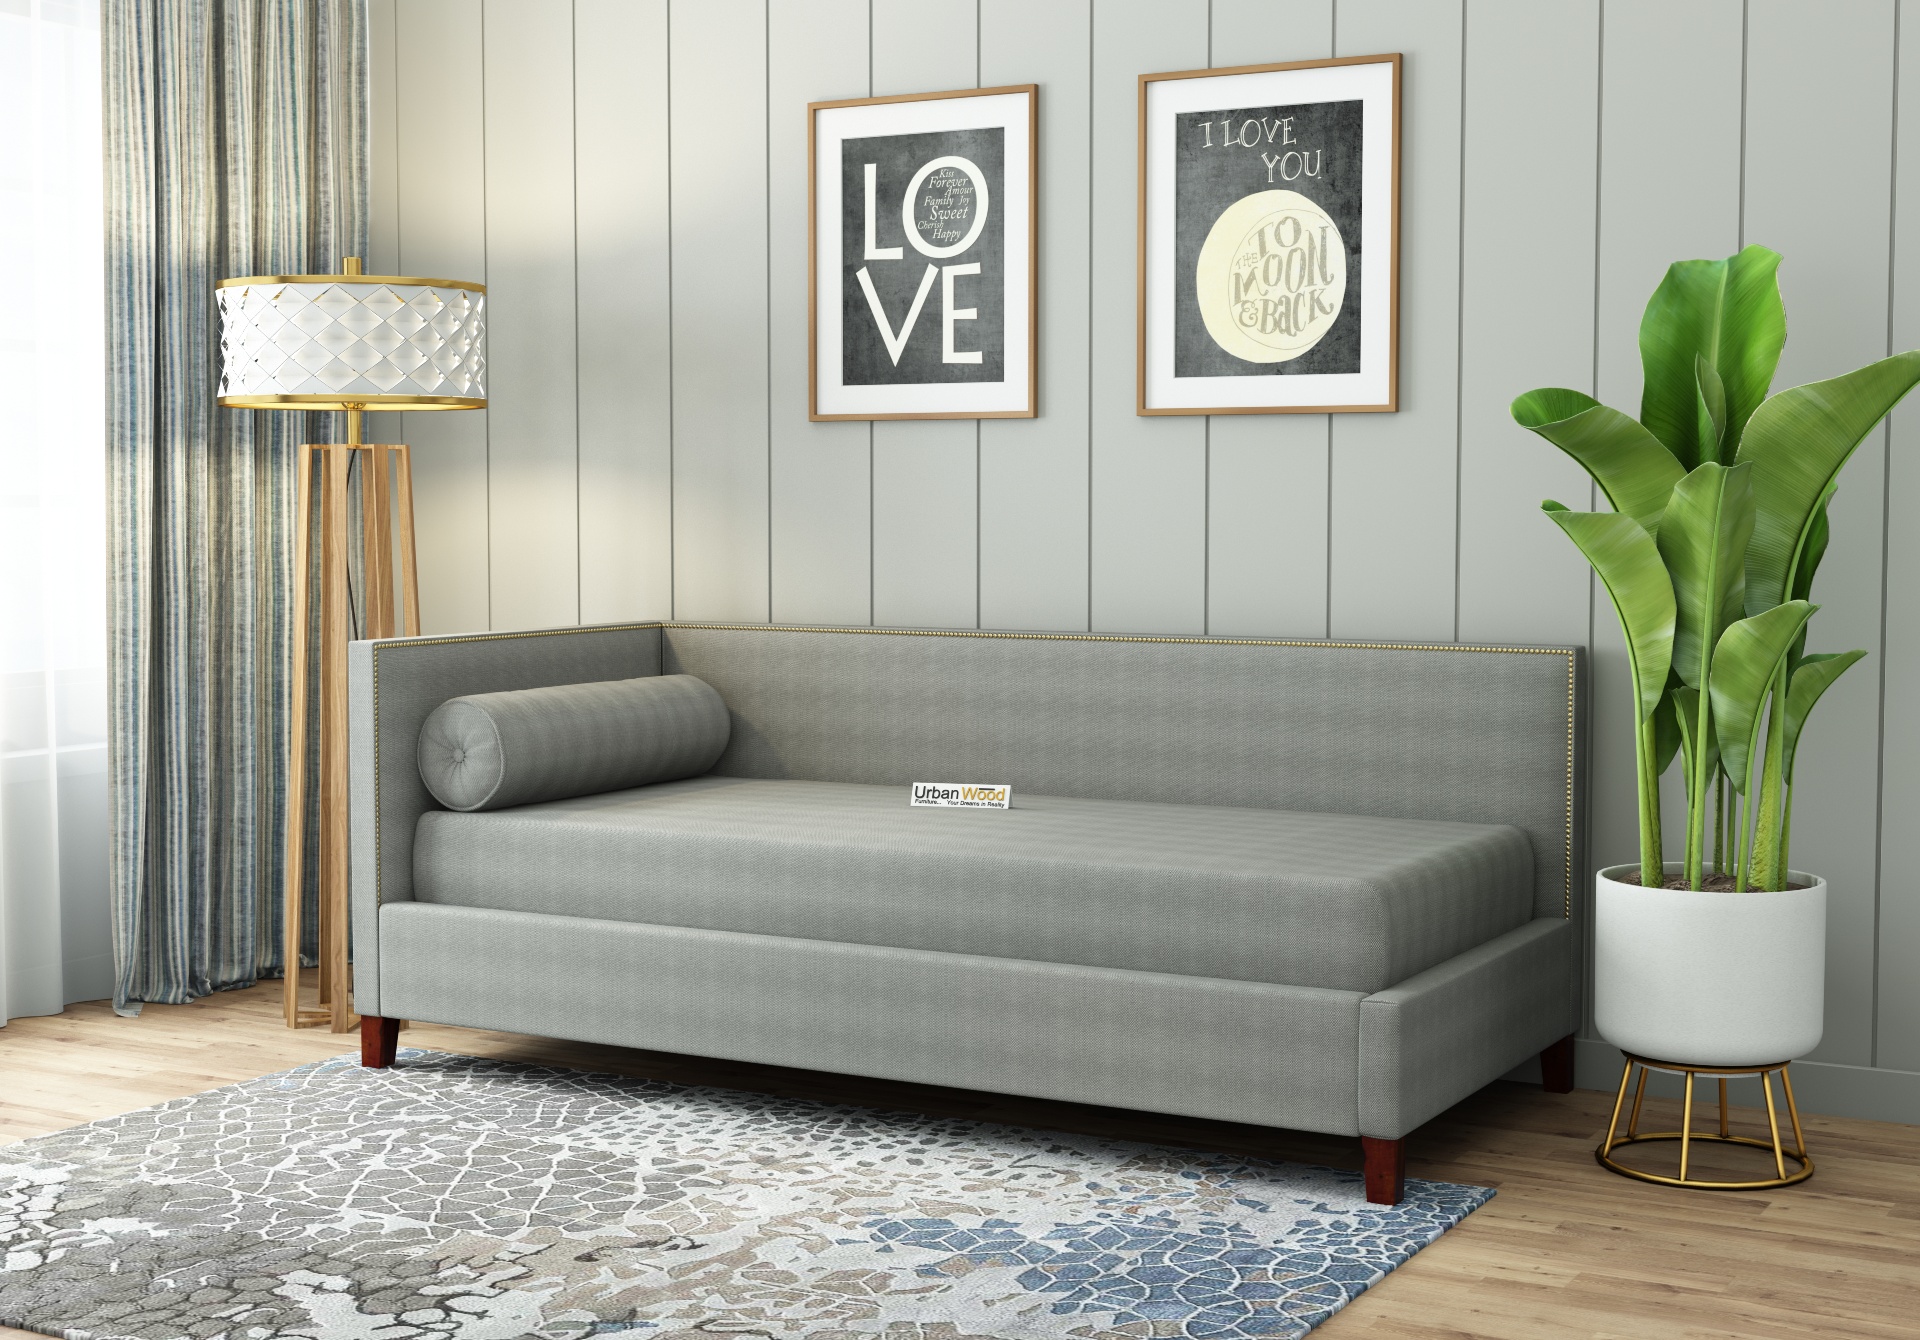 Bumble Chaise Lounge (Cotton, Steel Grey)